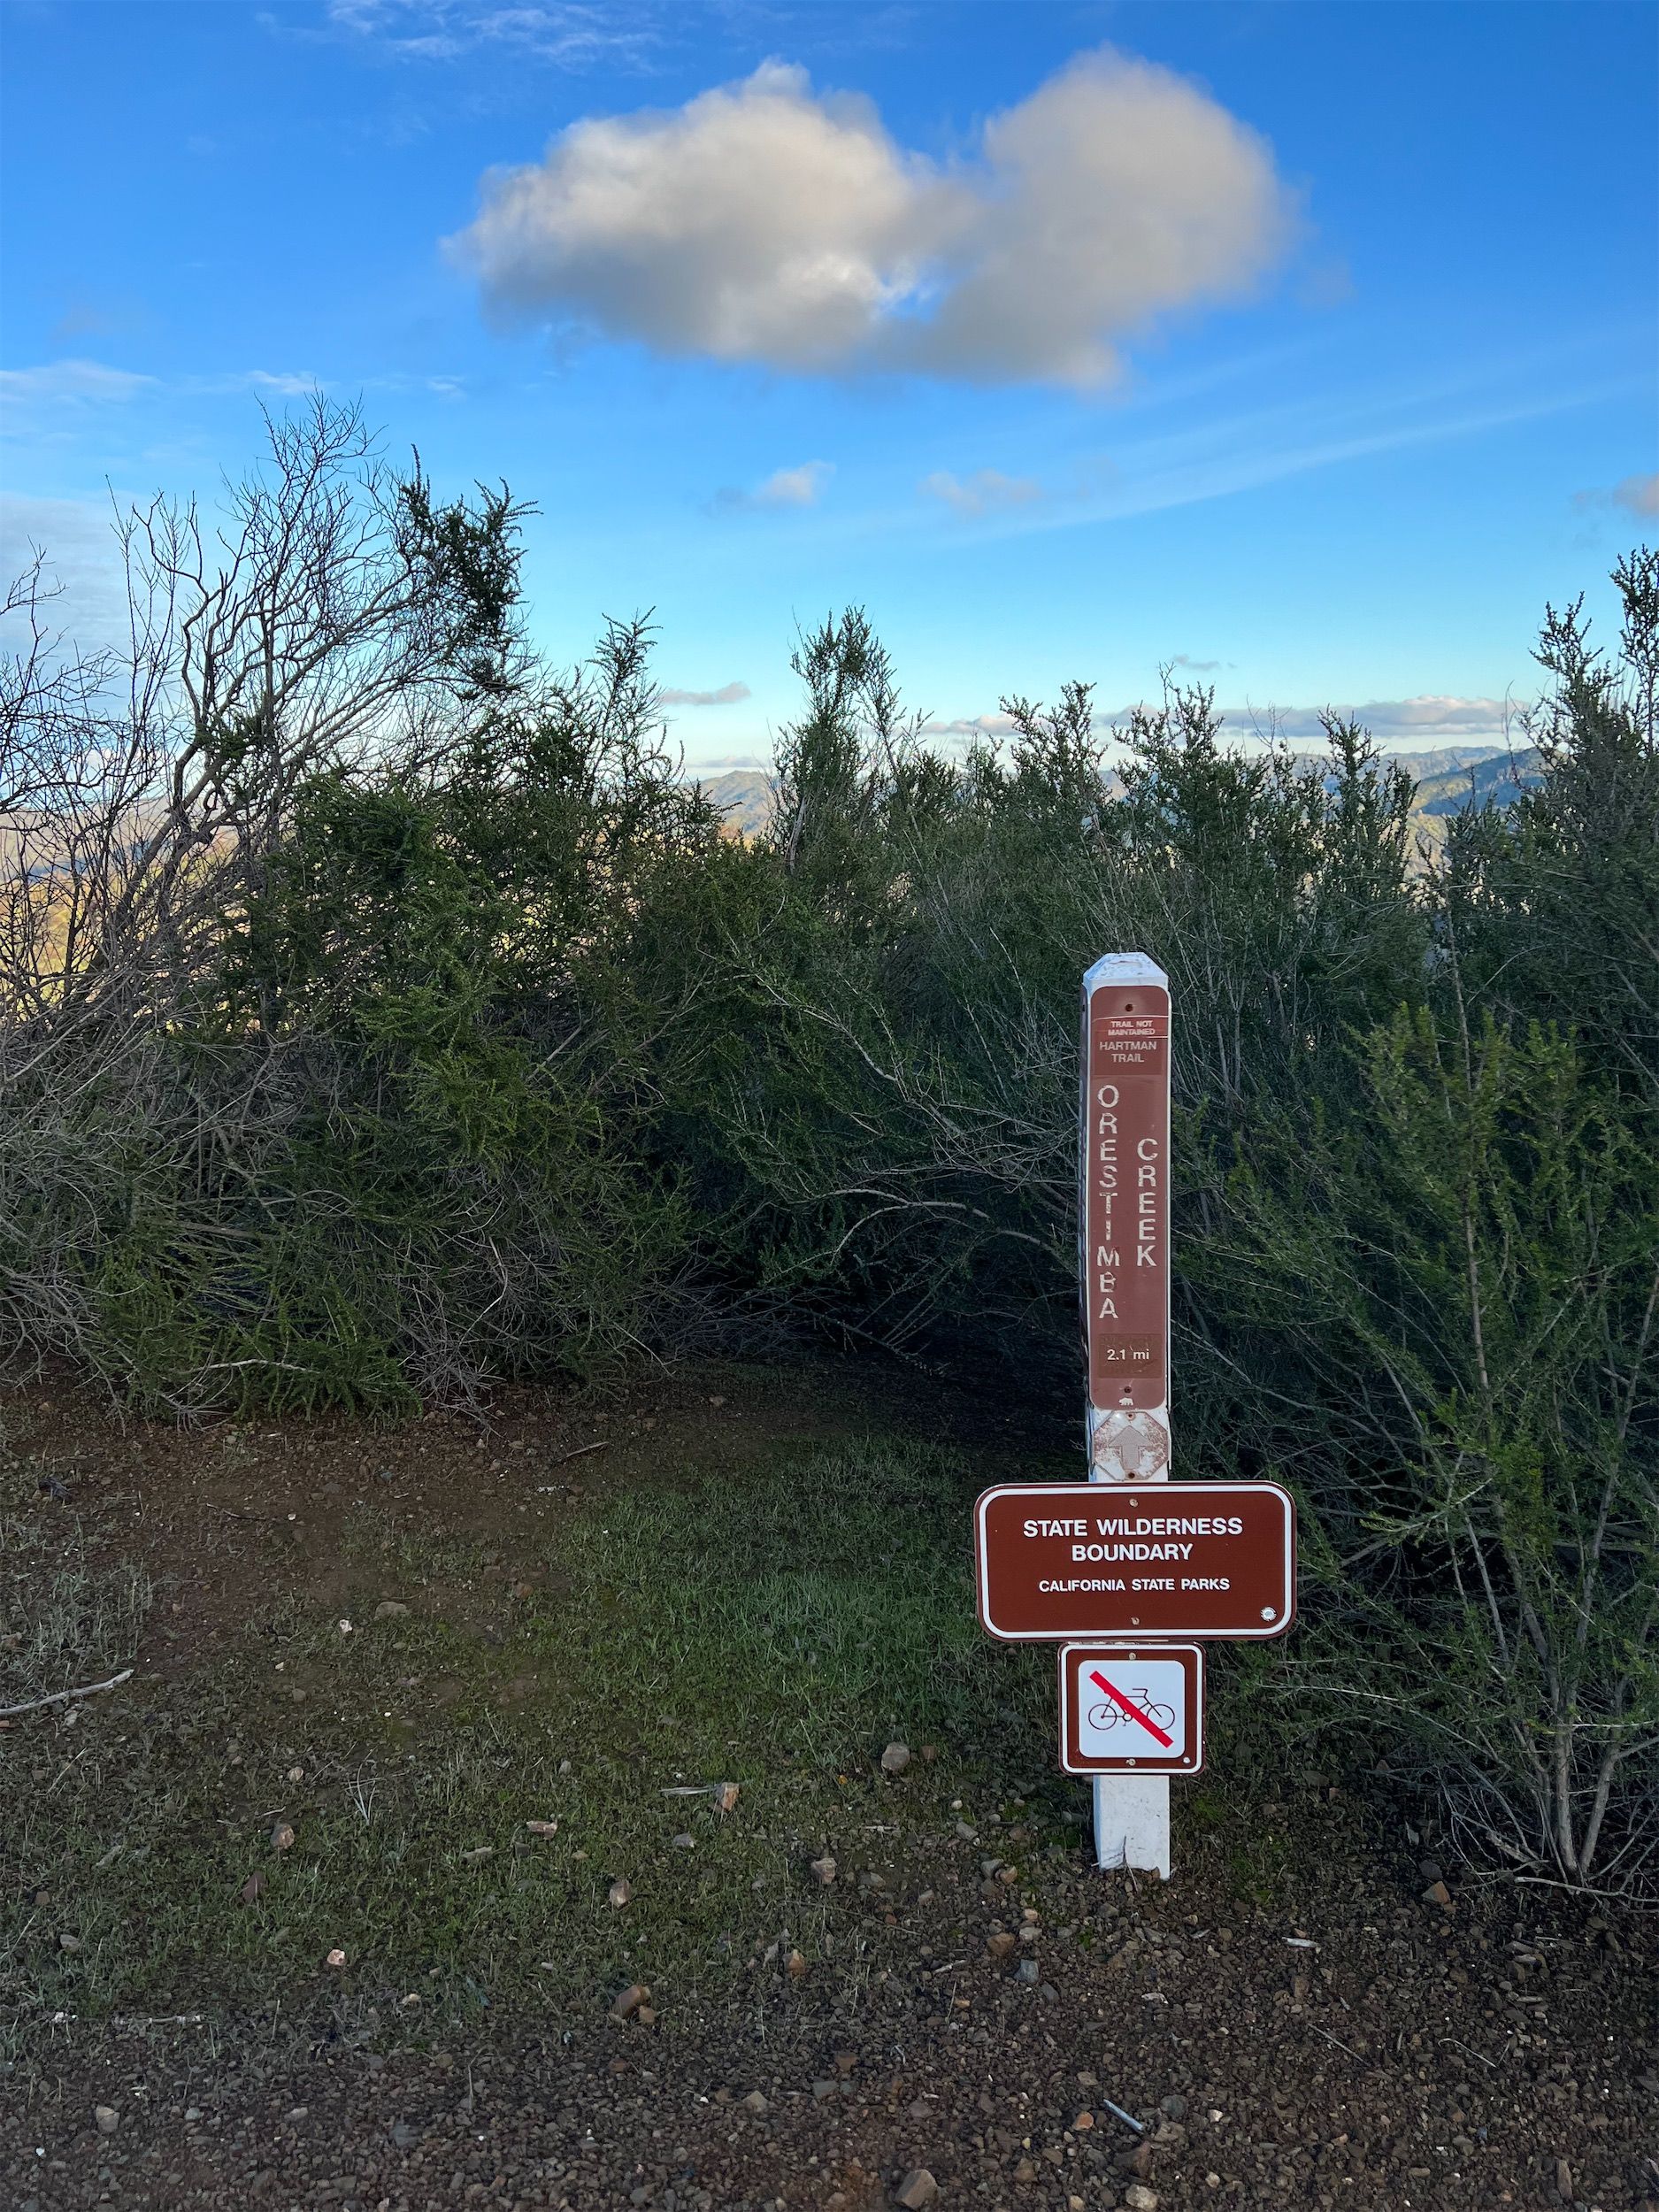 A trail sign pointing straight into inpenetrable brush.